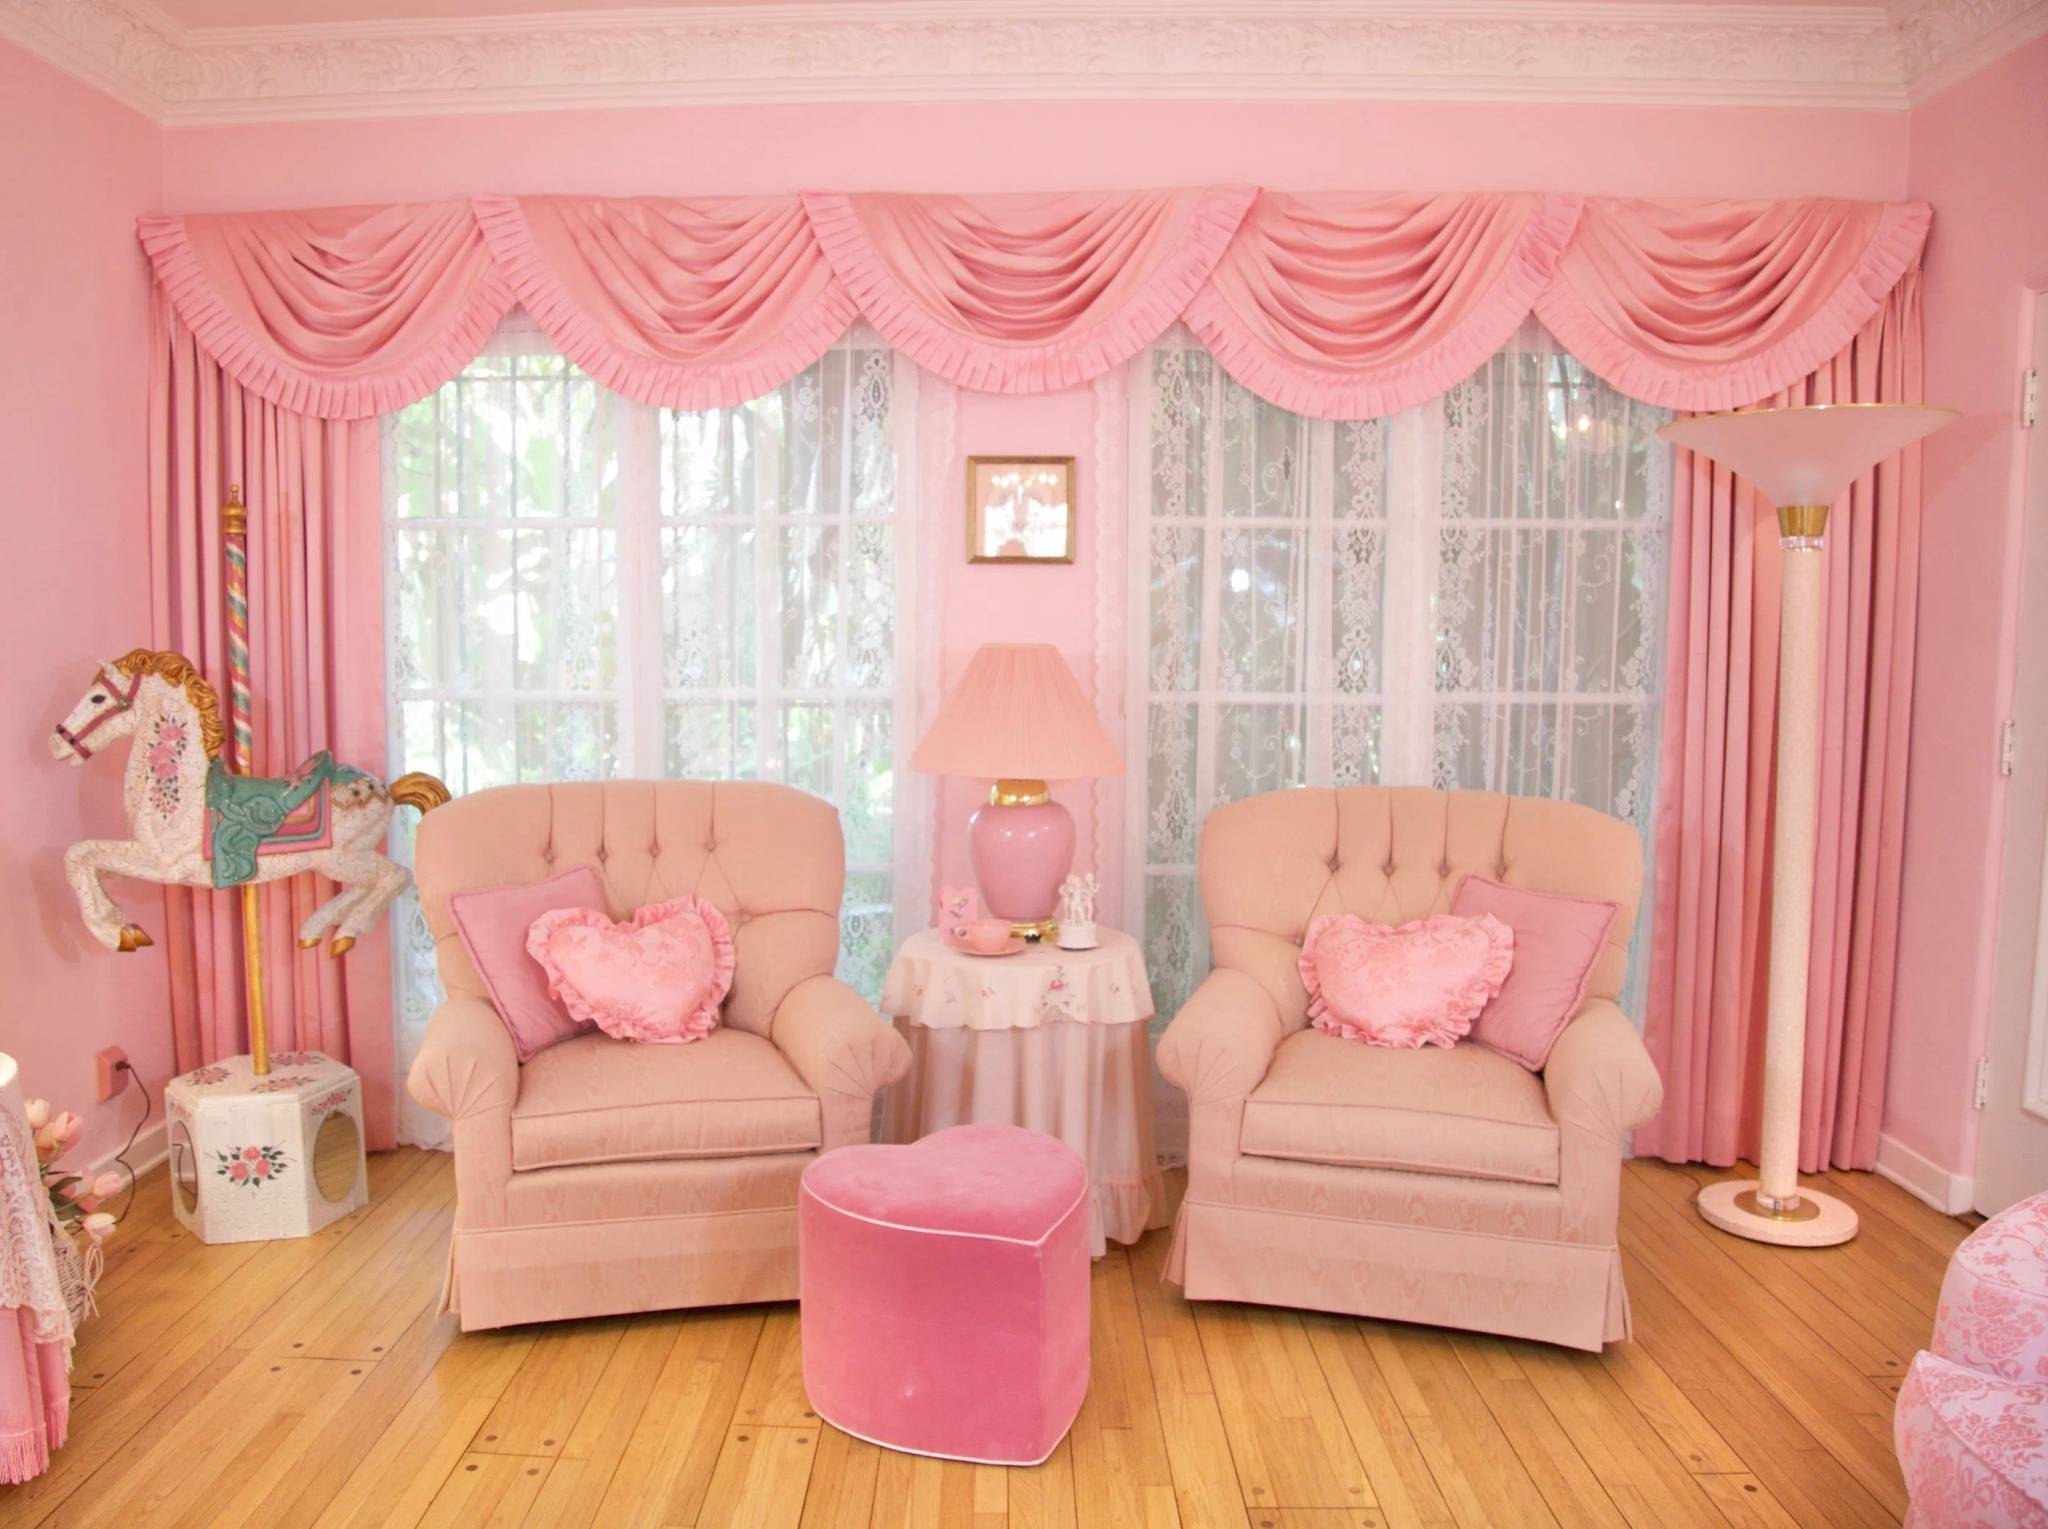 'Barbiecore' interiors offer comfort amid uncertainty 